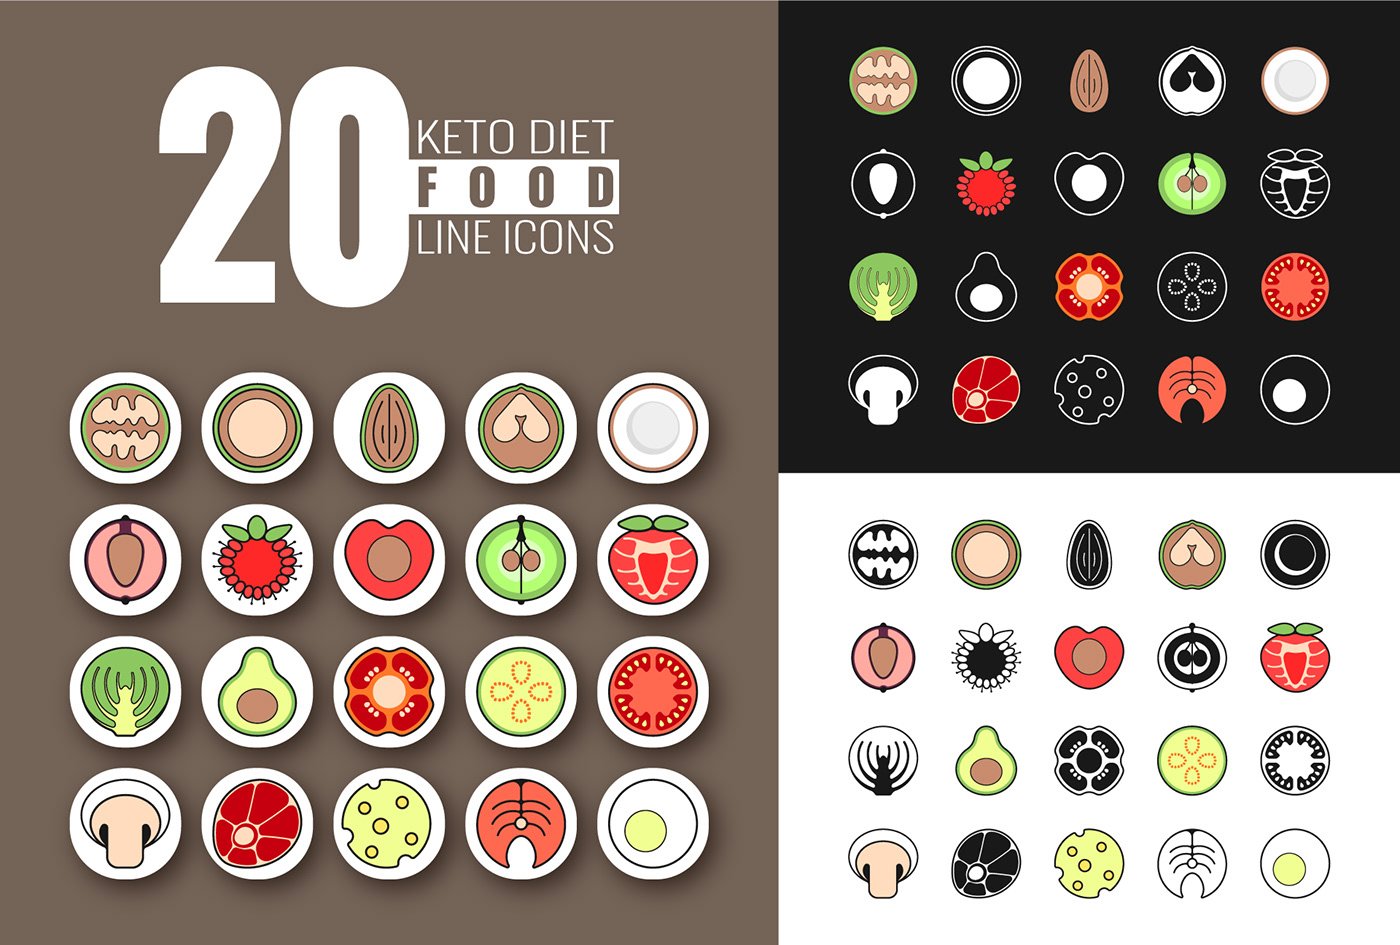 adobe illustrator button Collection diet healthy eating keto diet Mobile app Project set of icons